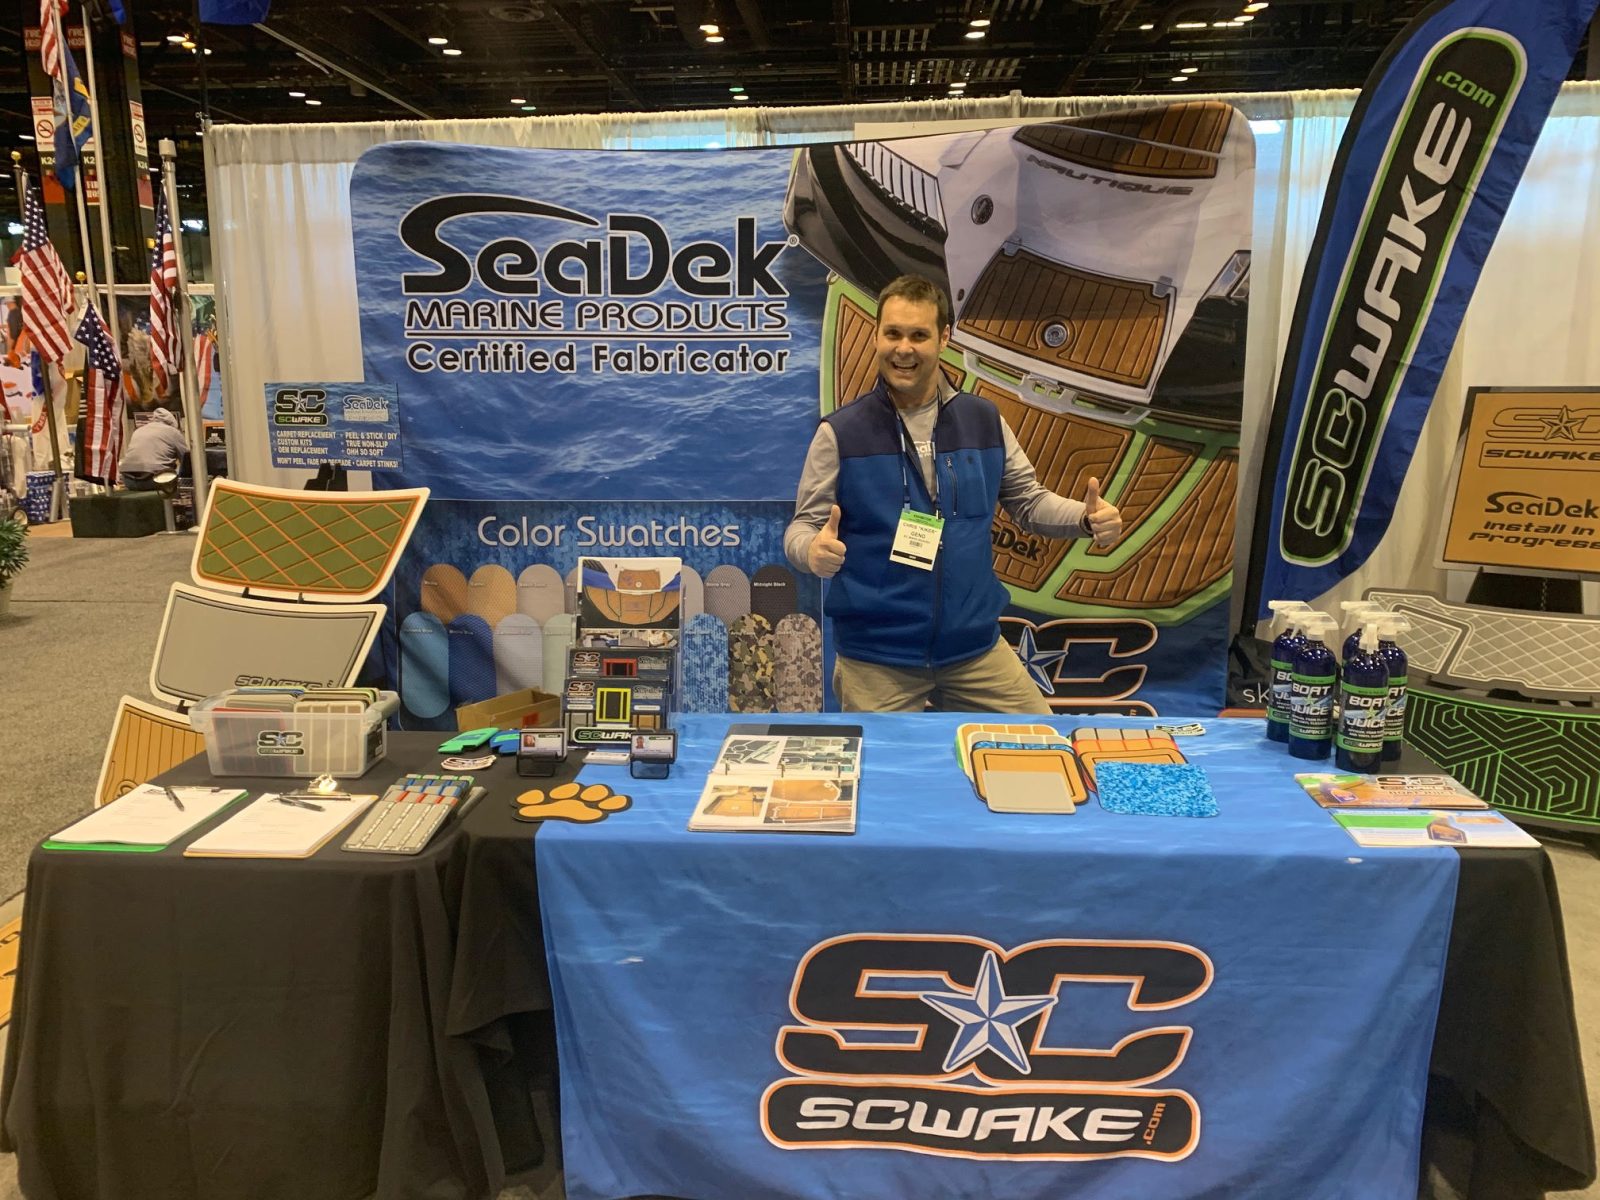 Chris Geng of SC Wake at the SeaDek Booth A204